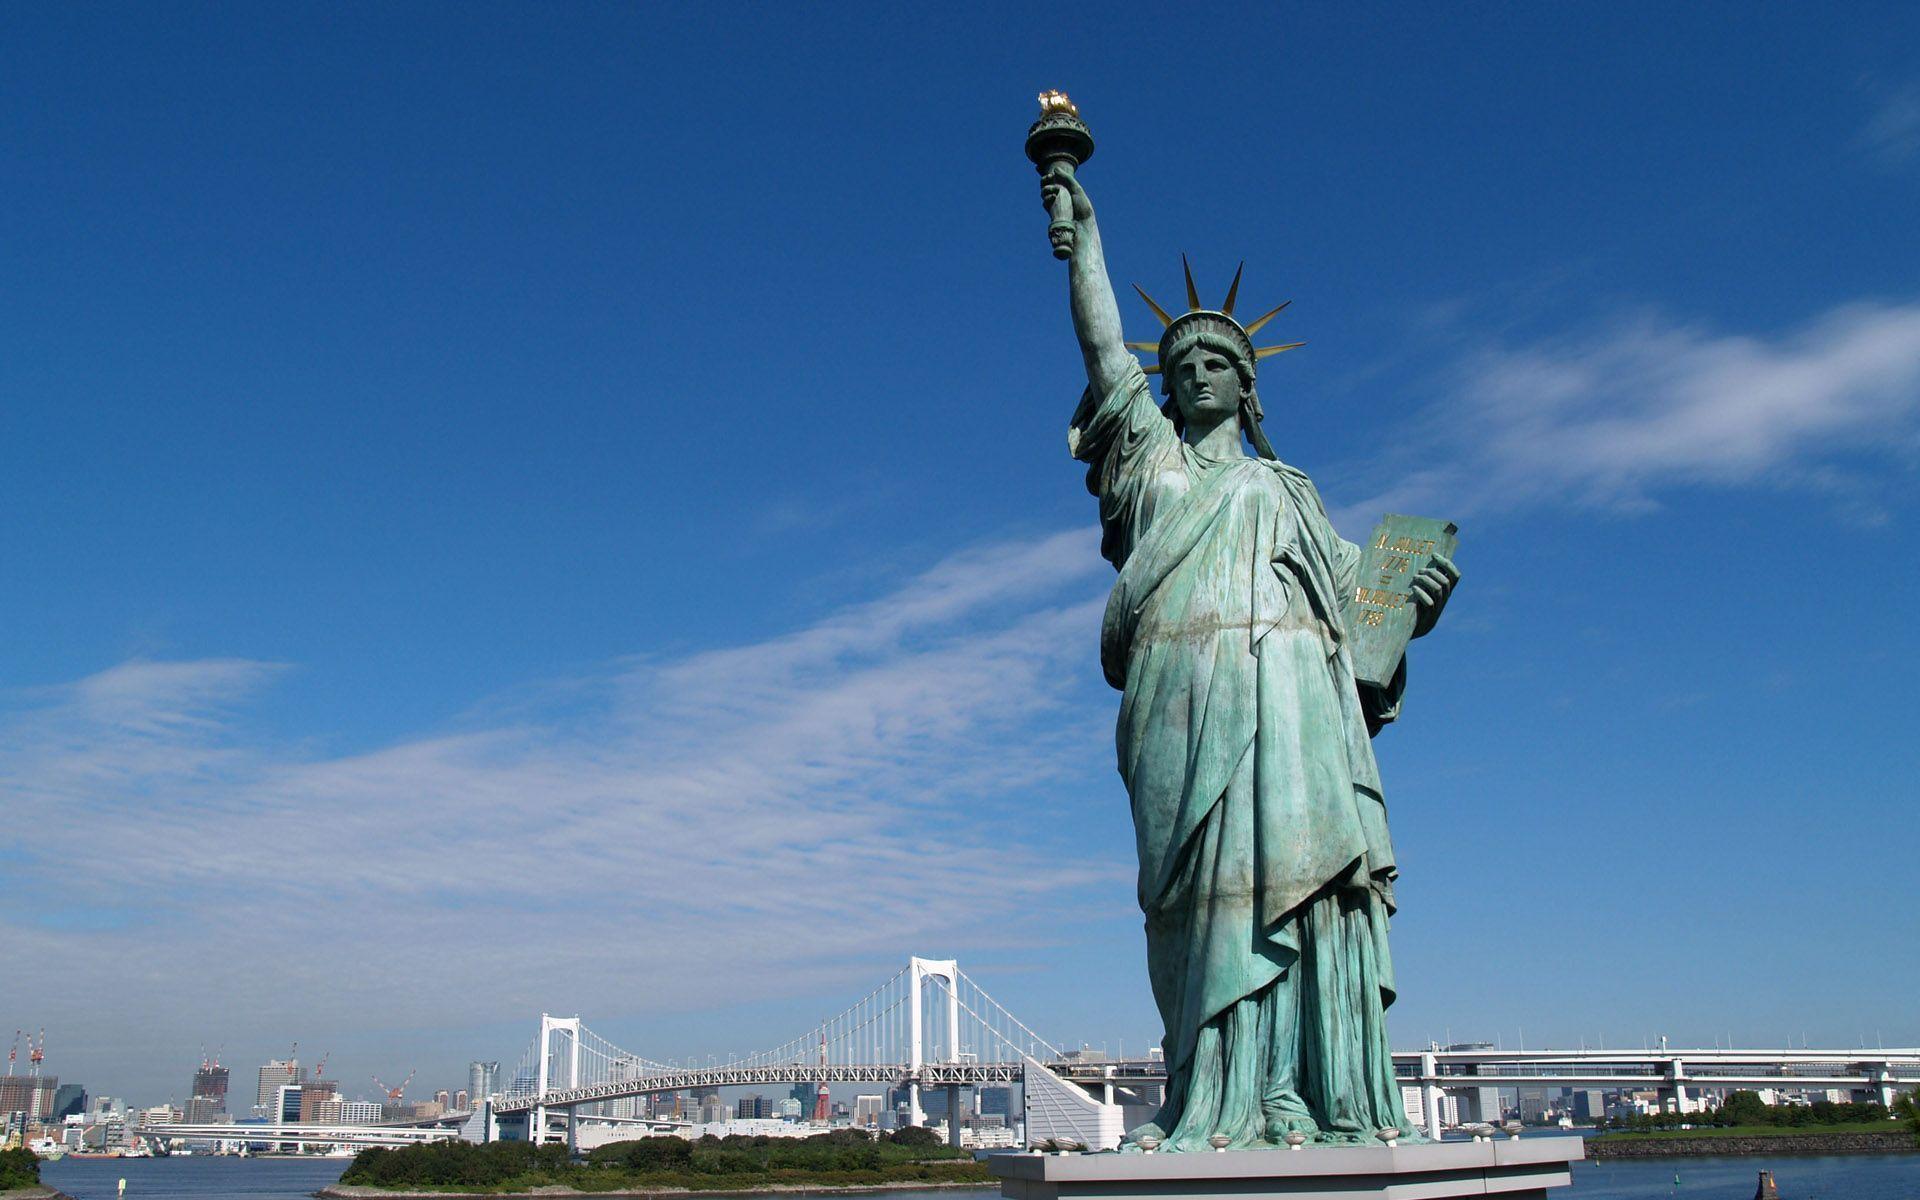 Statue Of Liberty Wallpapers